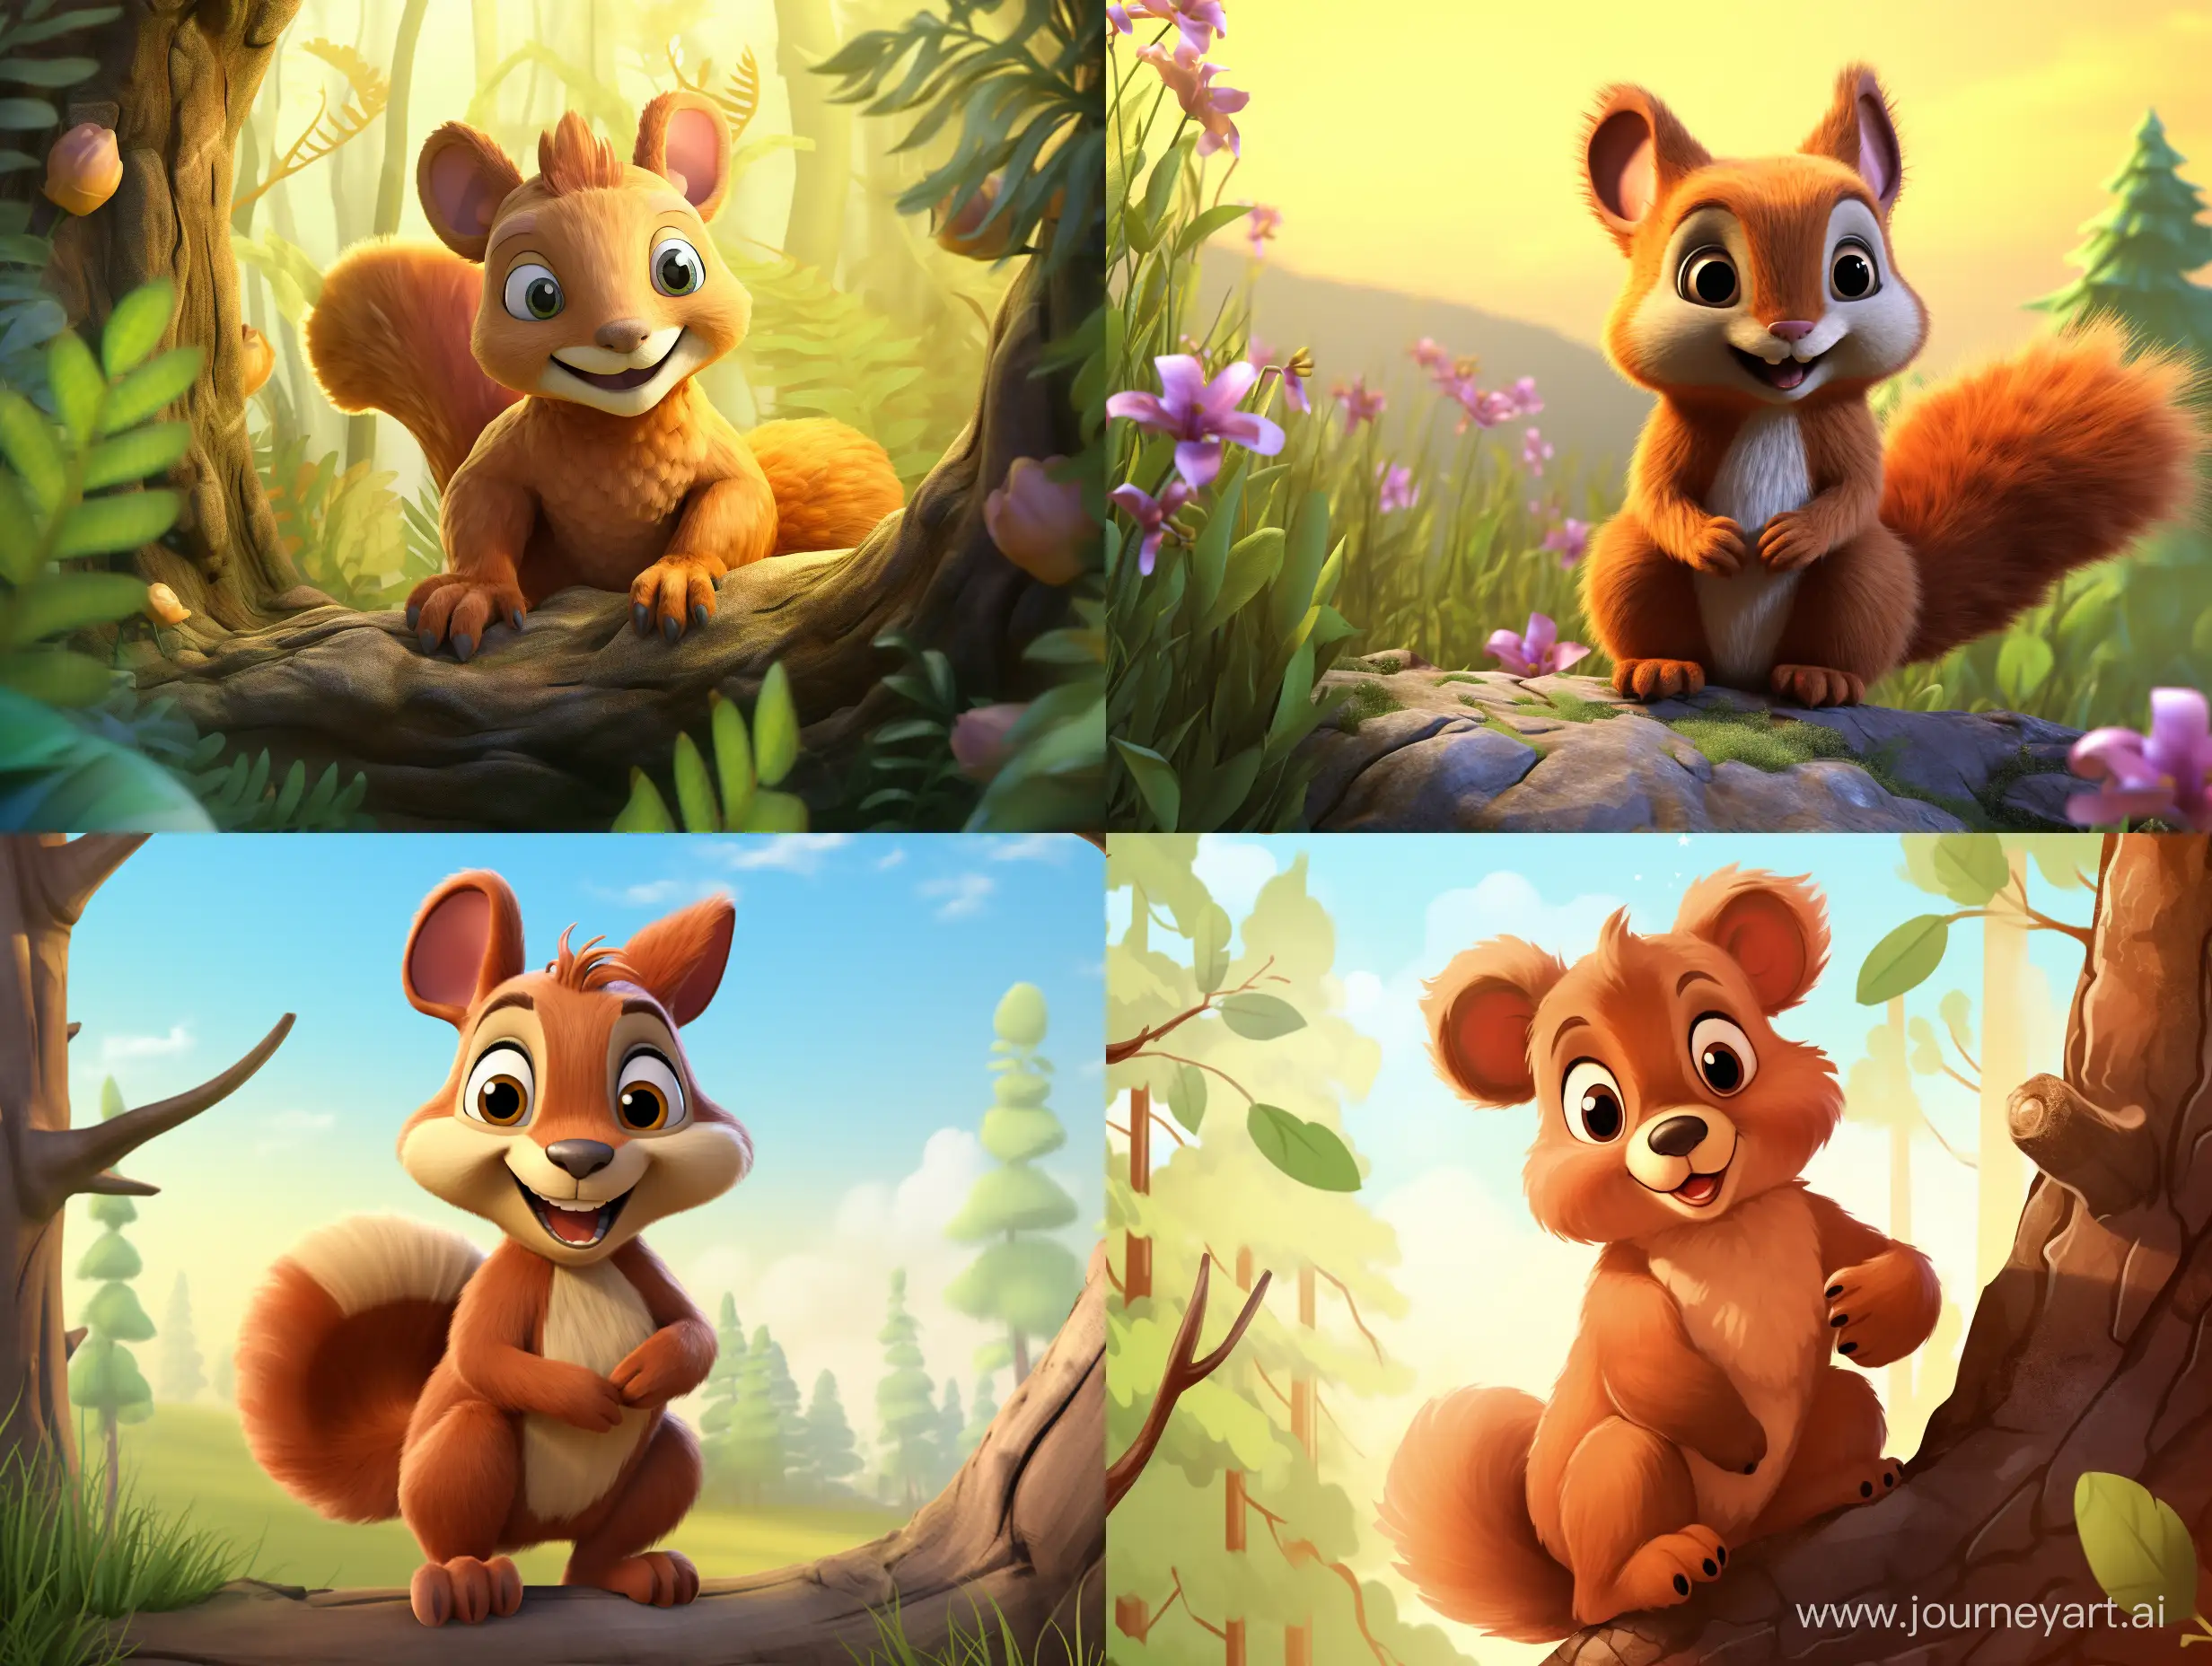 Adorable-Squirrel-Mascot-Poster-for-Childrens-Magazine